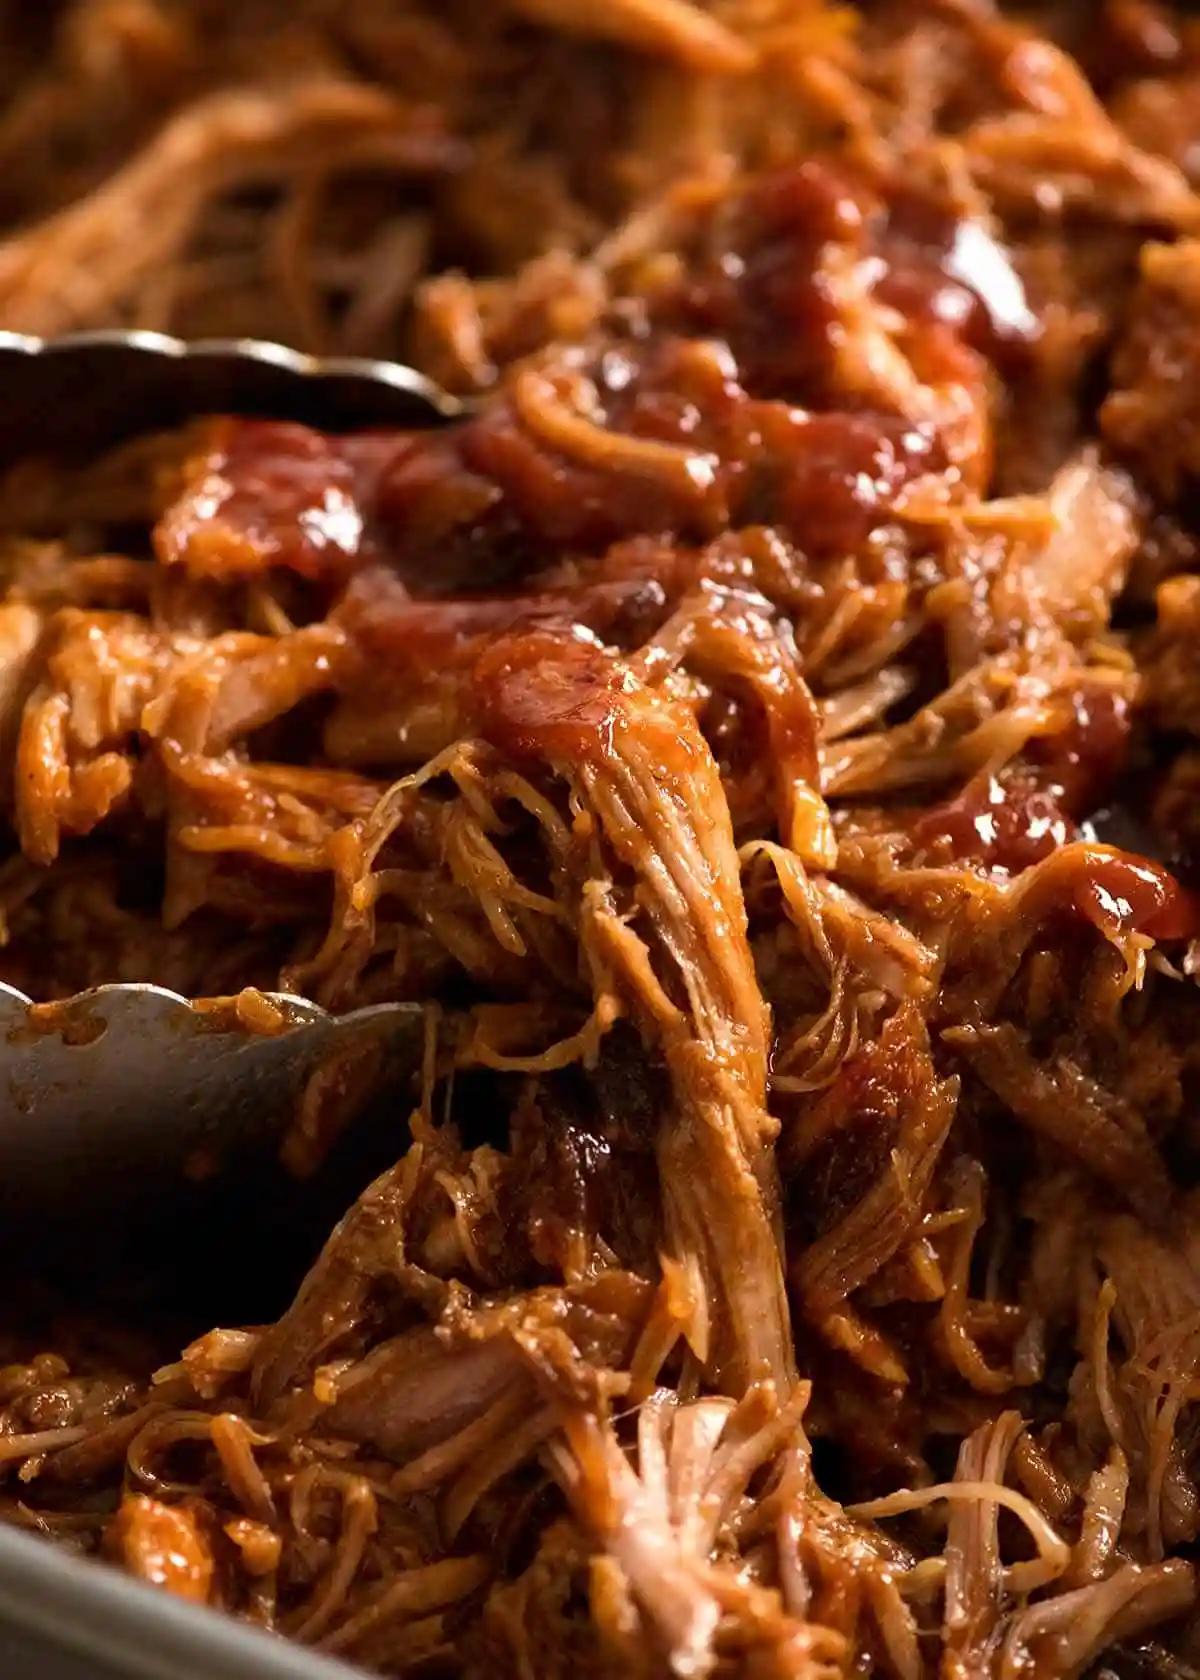 smoked pulled pork sauce - What is pulled pork sauce made of